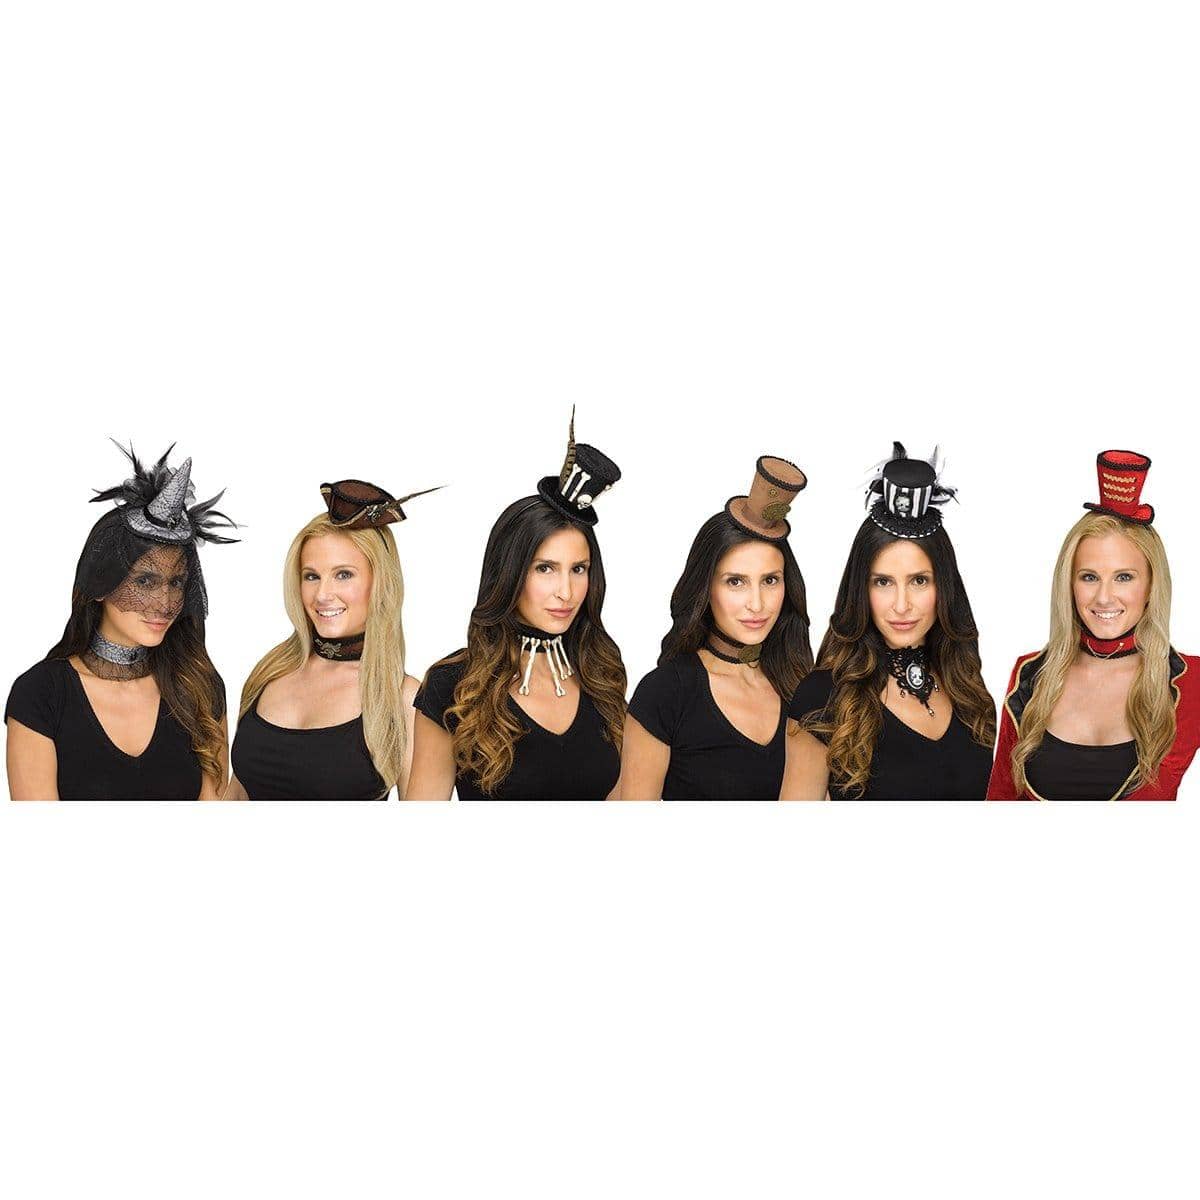 Buy Costume Accessories Mini hat & choker set - Assortment sold at Party Expert